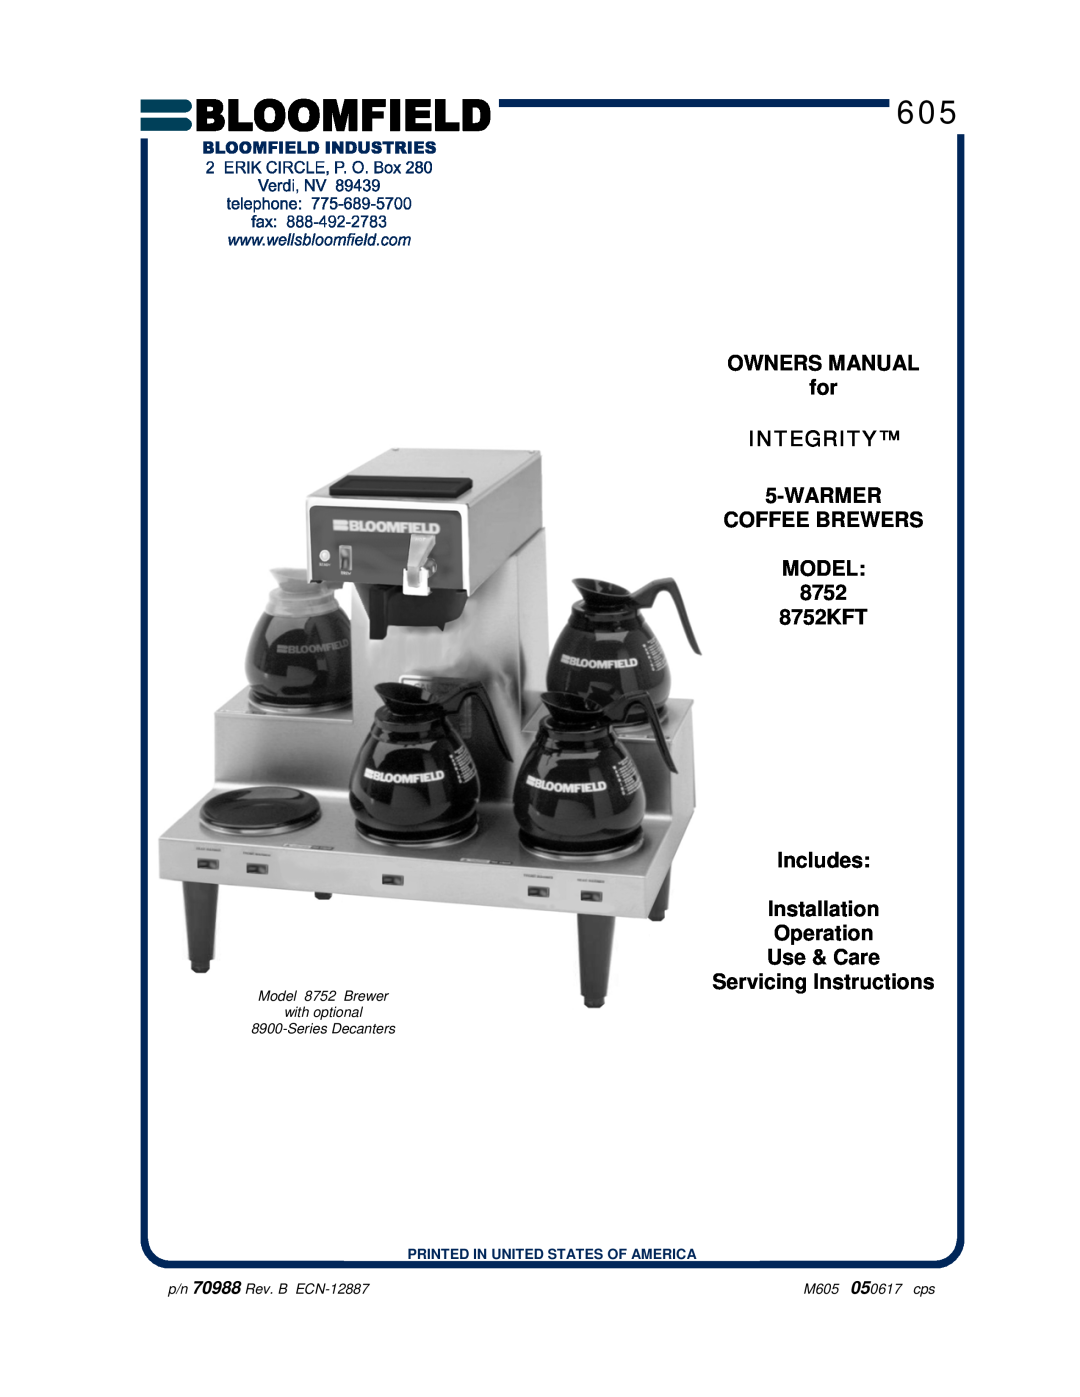 Bloomfield owner manual OWNERS MANUAL for INTEGRITY 5-WARMER COFFEE BREWERS MODEL 8752, Servicing Instructions 